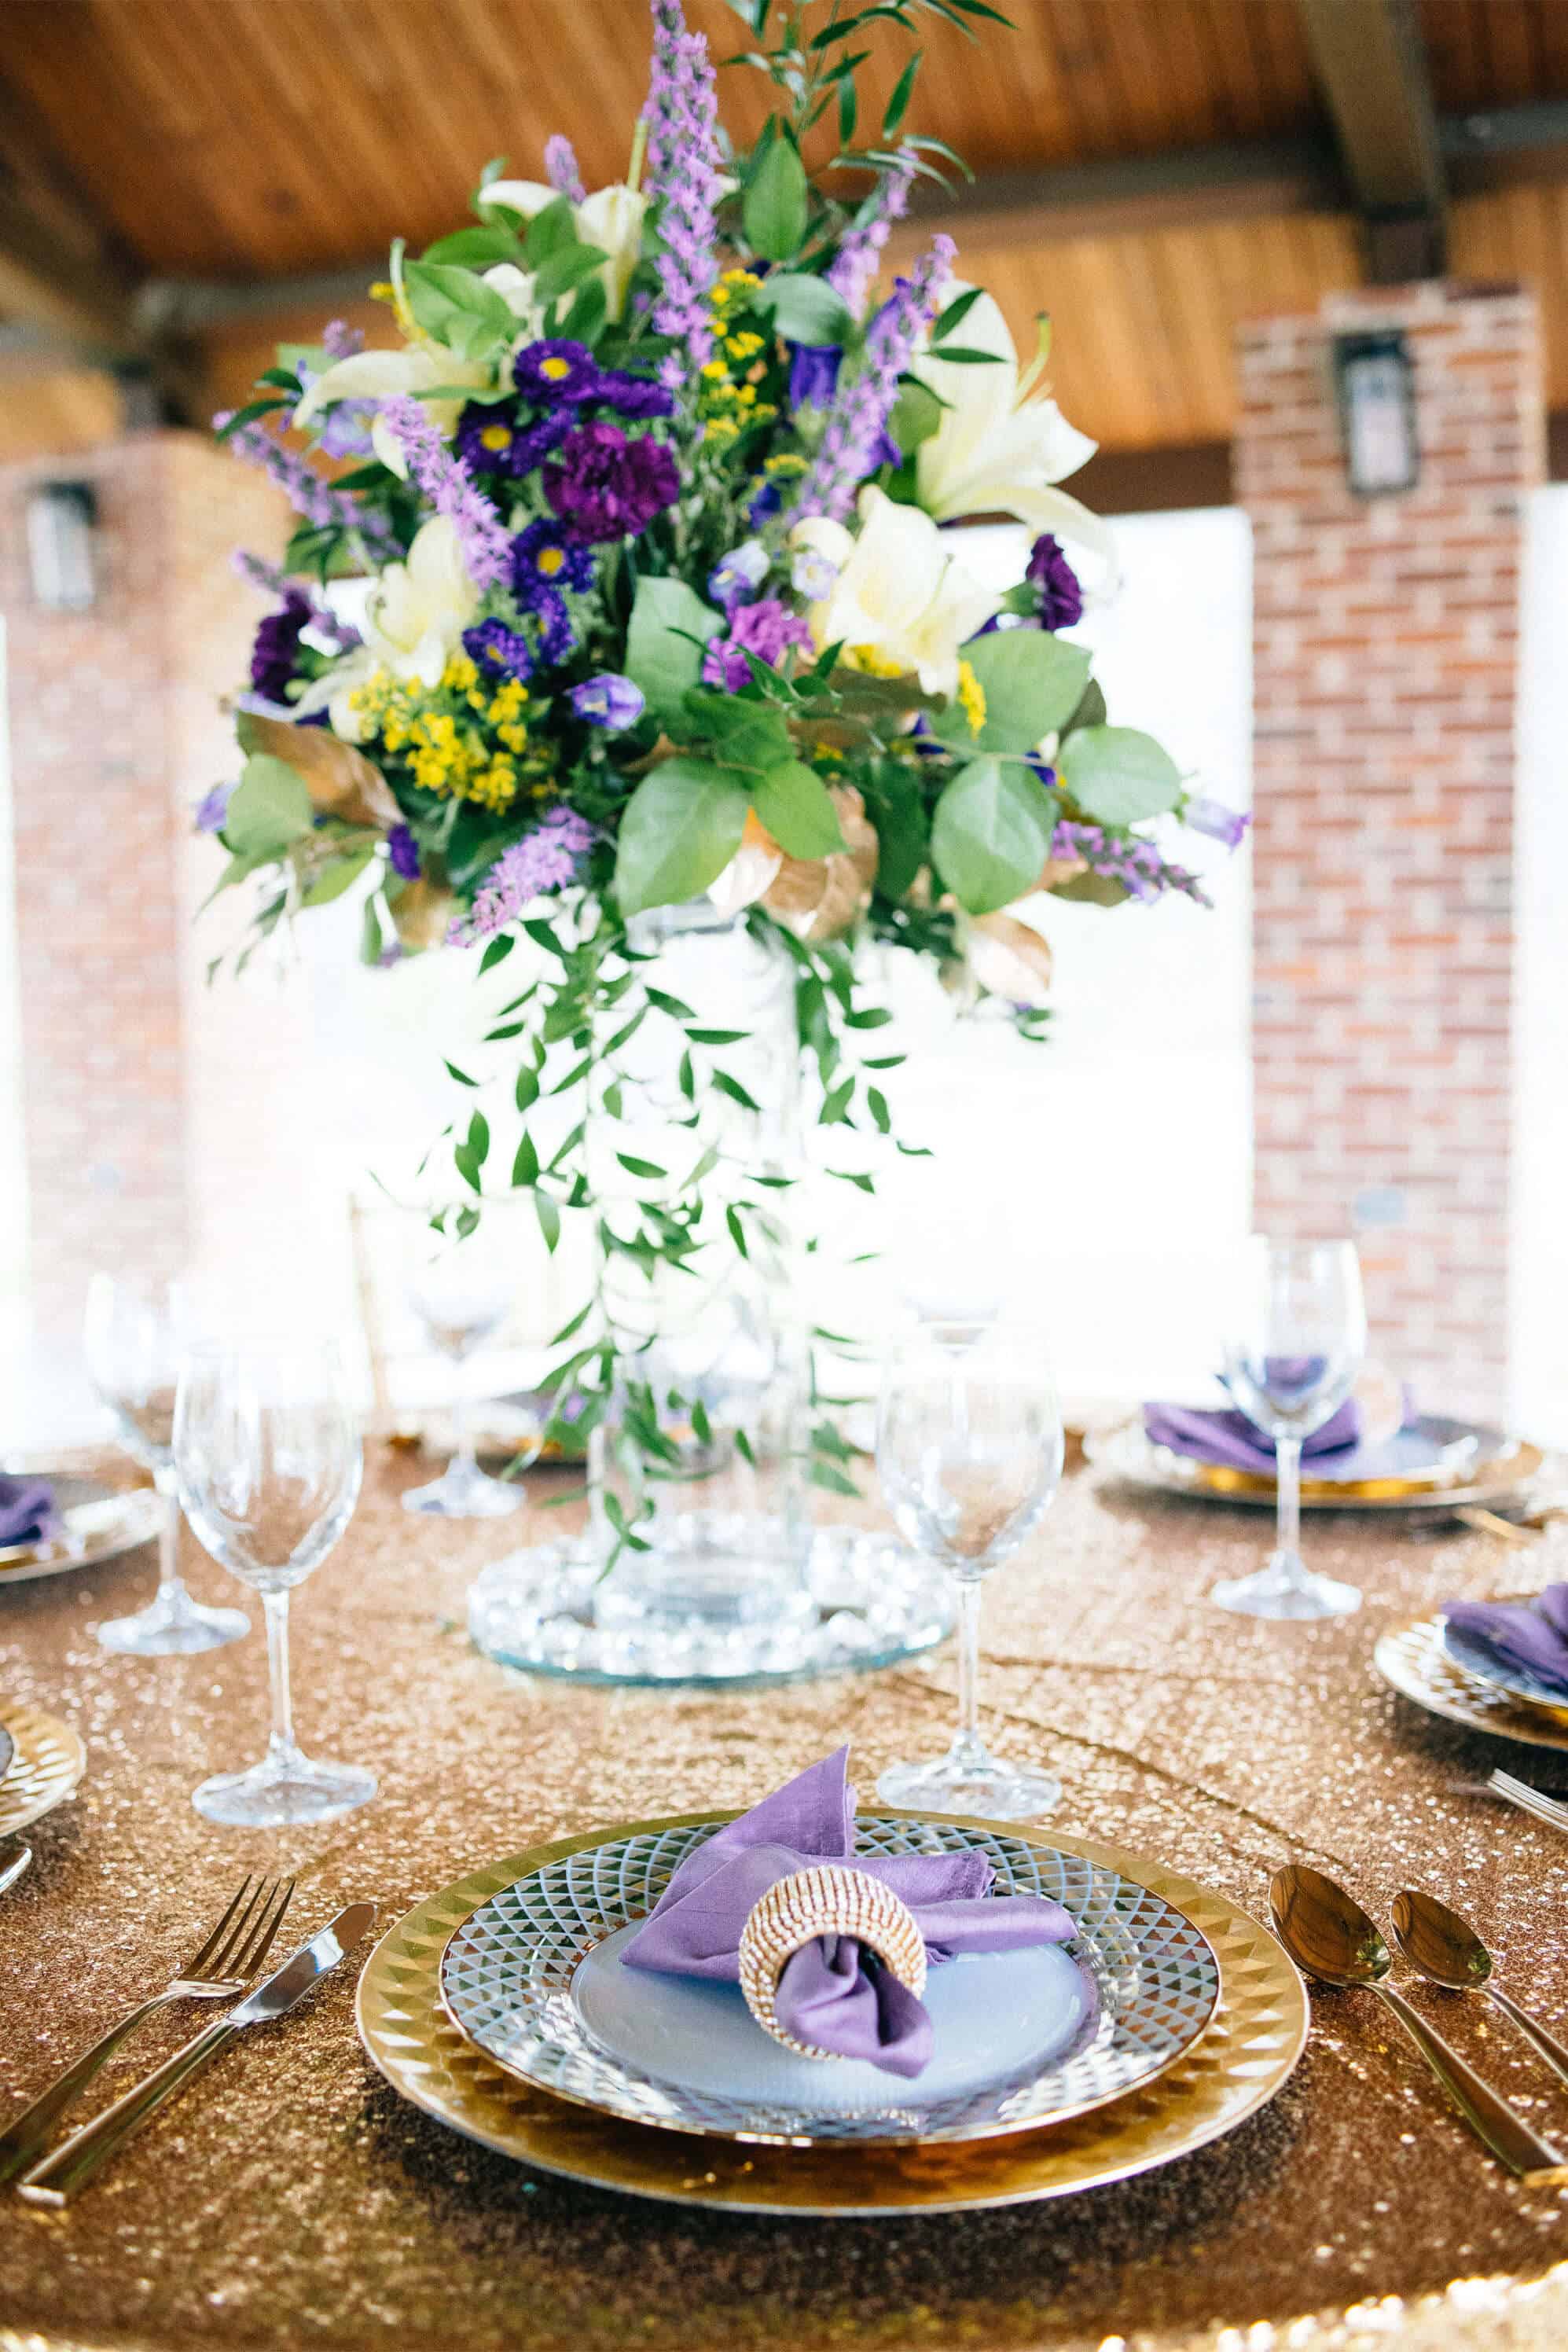 A table set with plates and glasses, and flowers in the center.